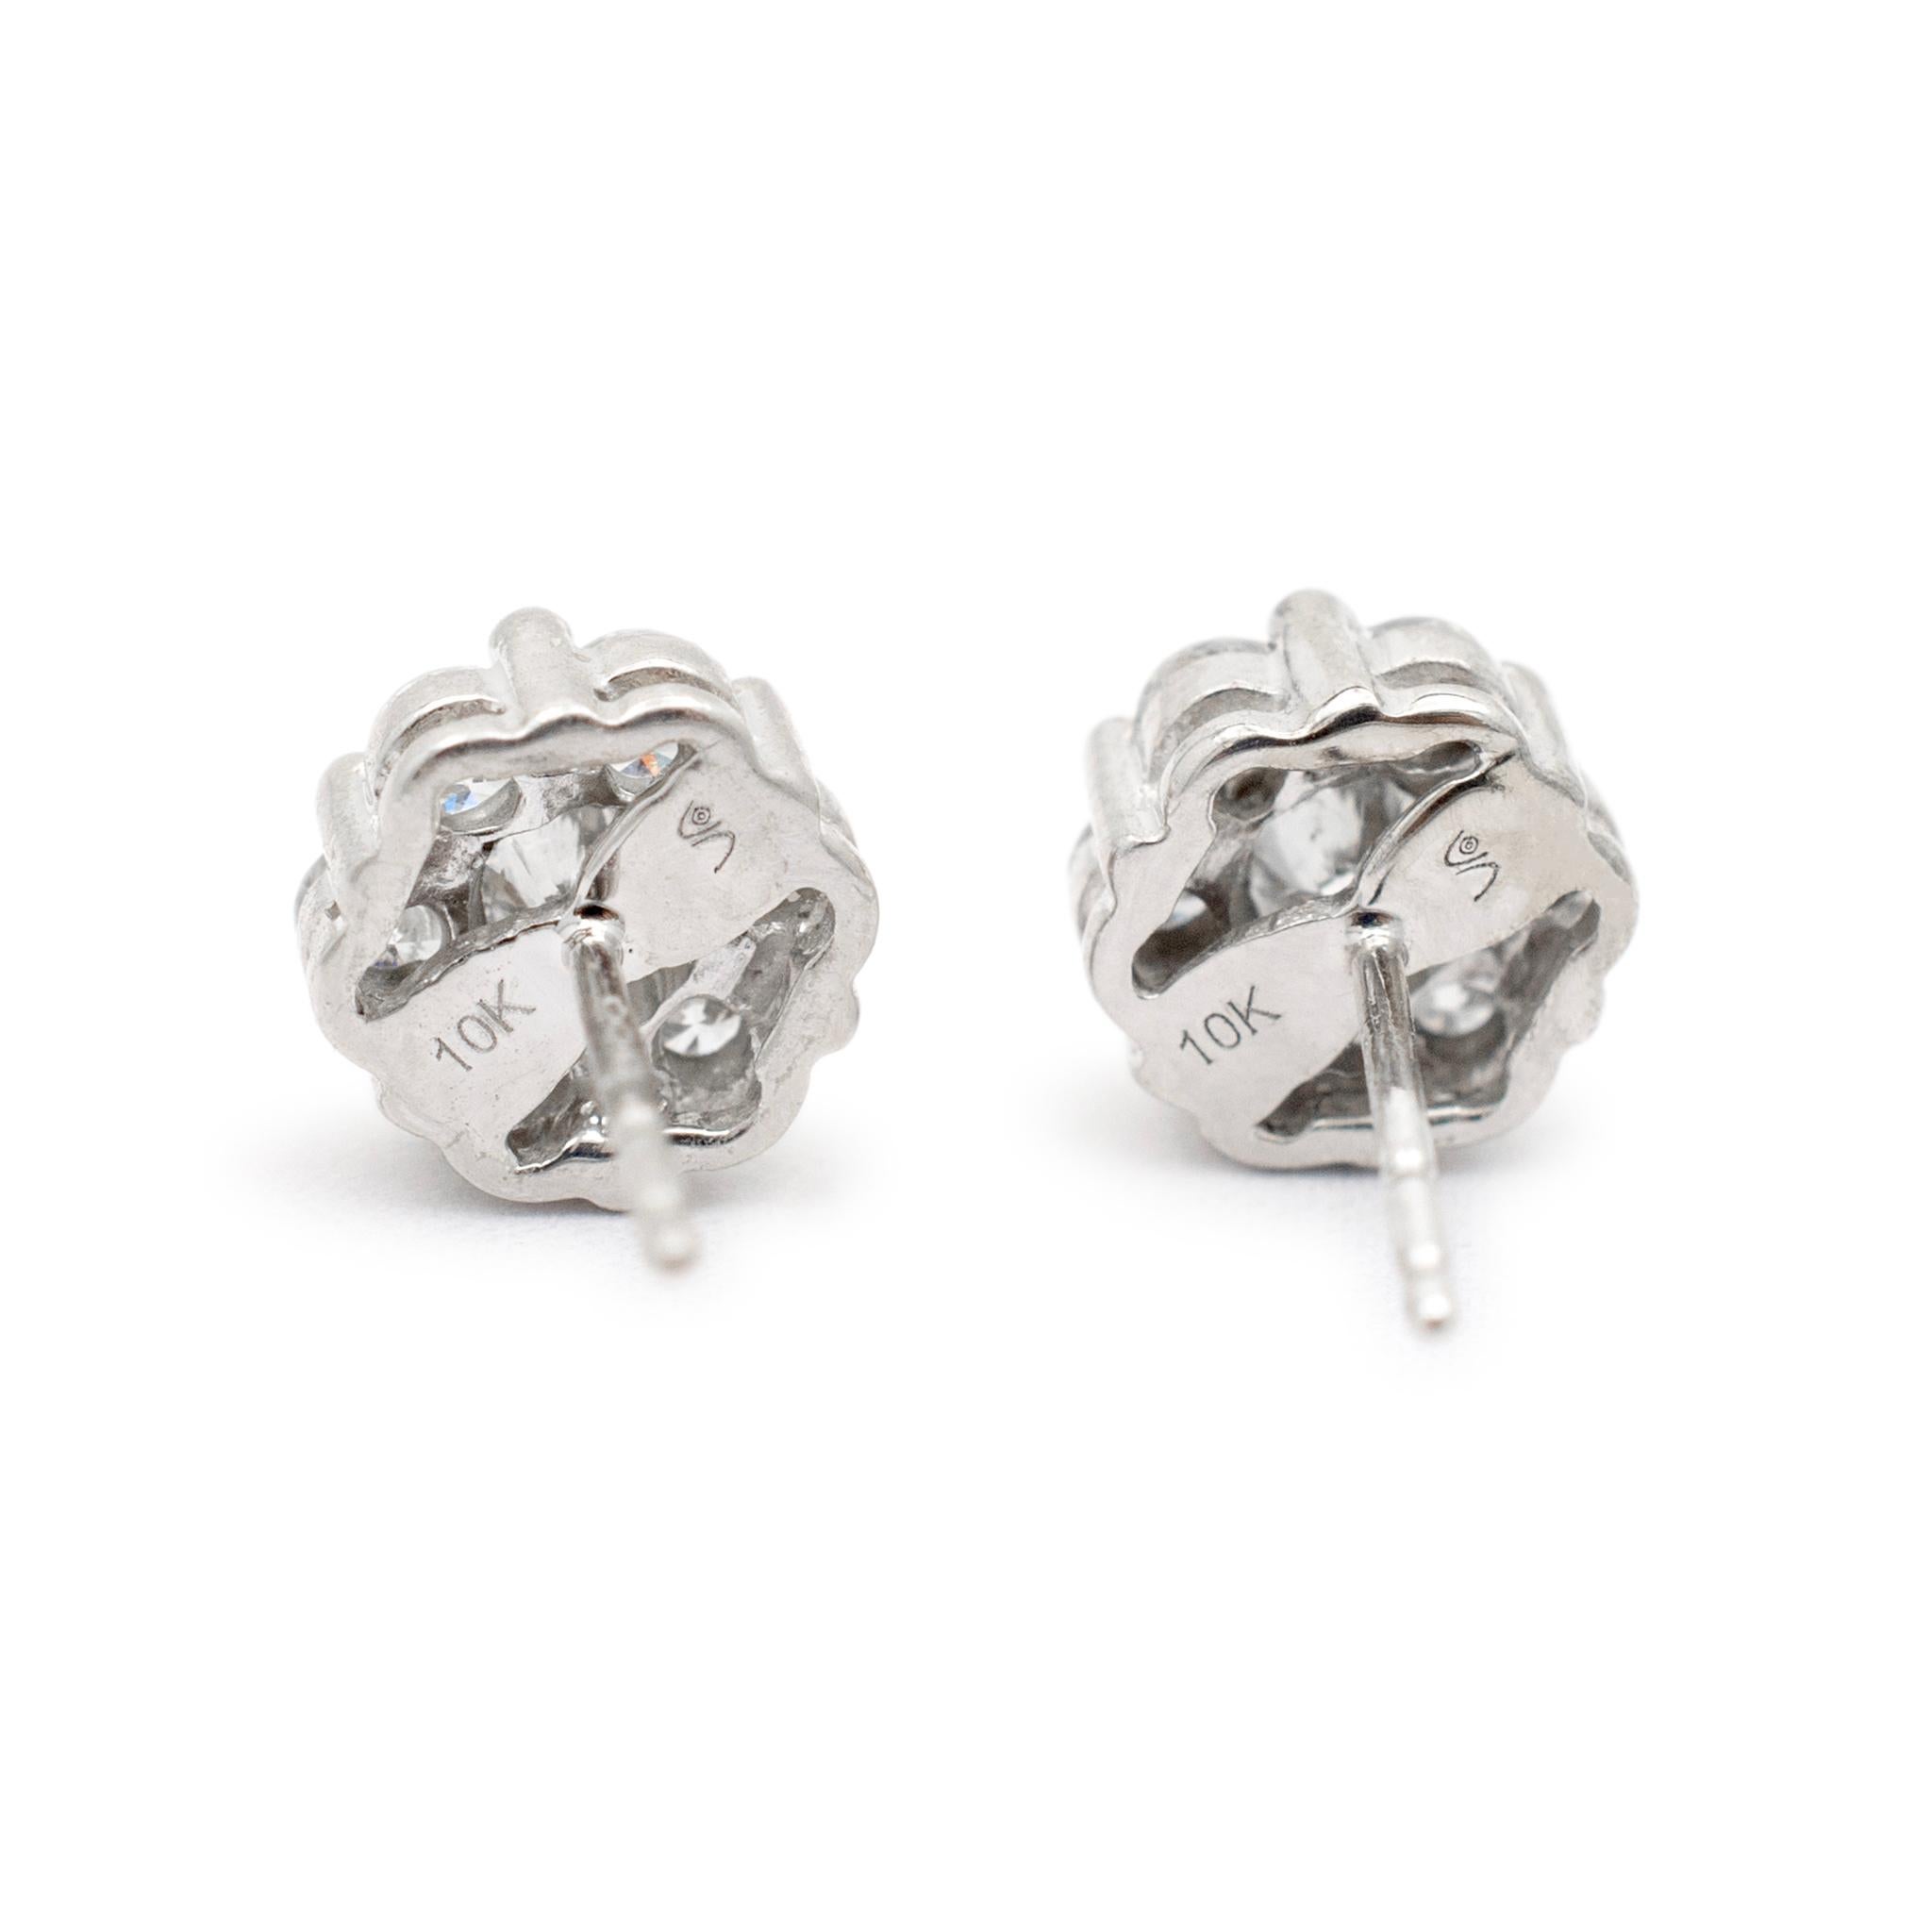 Gender: Ladies

Metal Type: 10K White Gold

Length: 0.50 Inches

Diameter: 7.50 mm

Weight: 2.06 grams

Ladies 10K white gold diamond stud earrings with push backs. Engraved with 